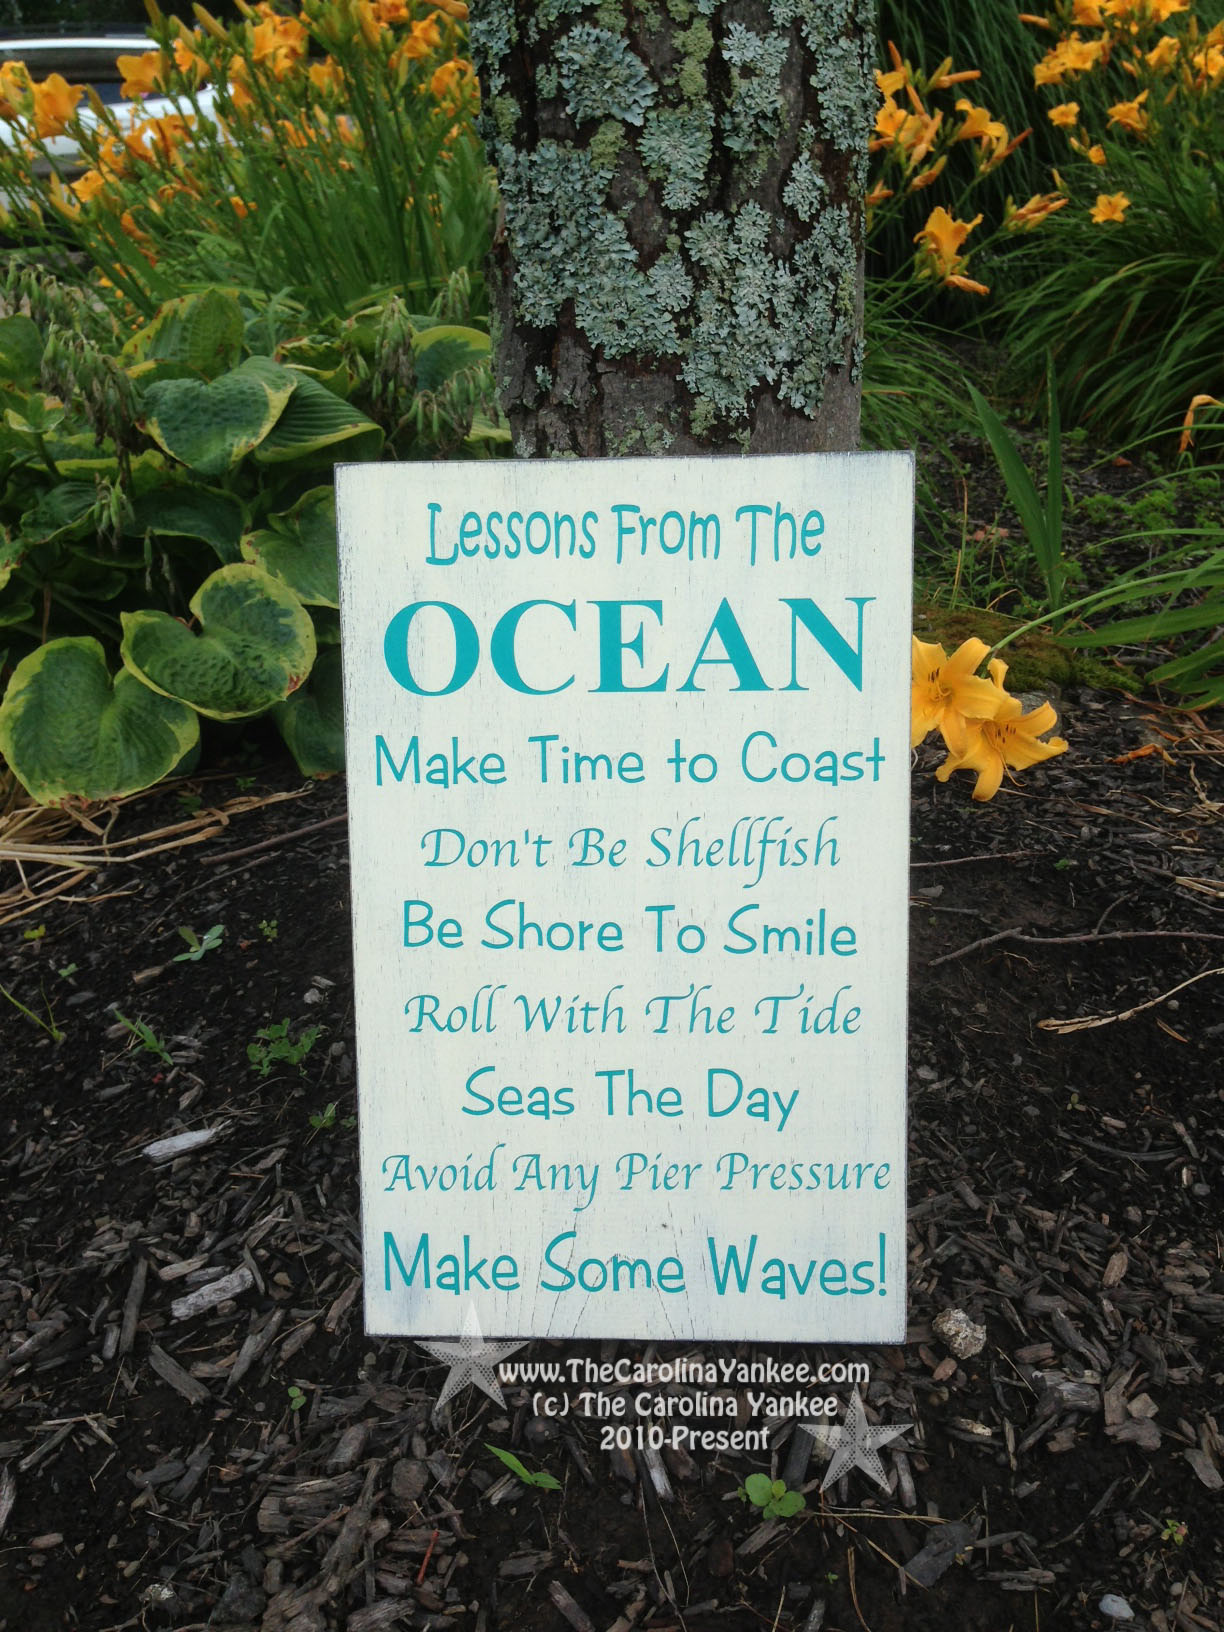 Lessons From The Ocean Home Decor Wood Board 9"x13" - Wall Hanging, Primitive, Distressed, Beach, Dock, Beach House